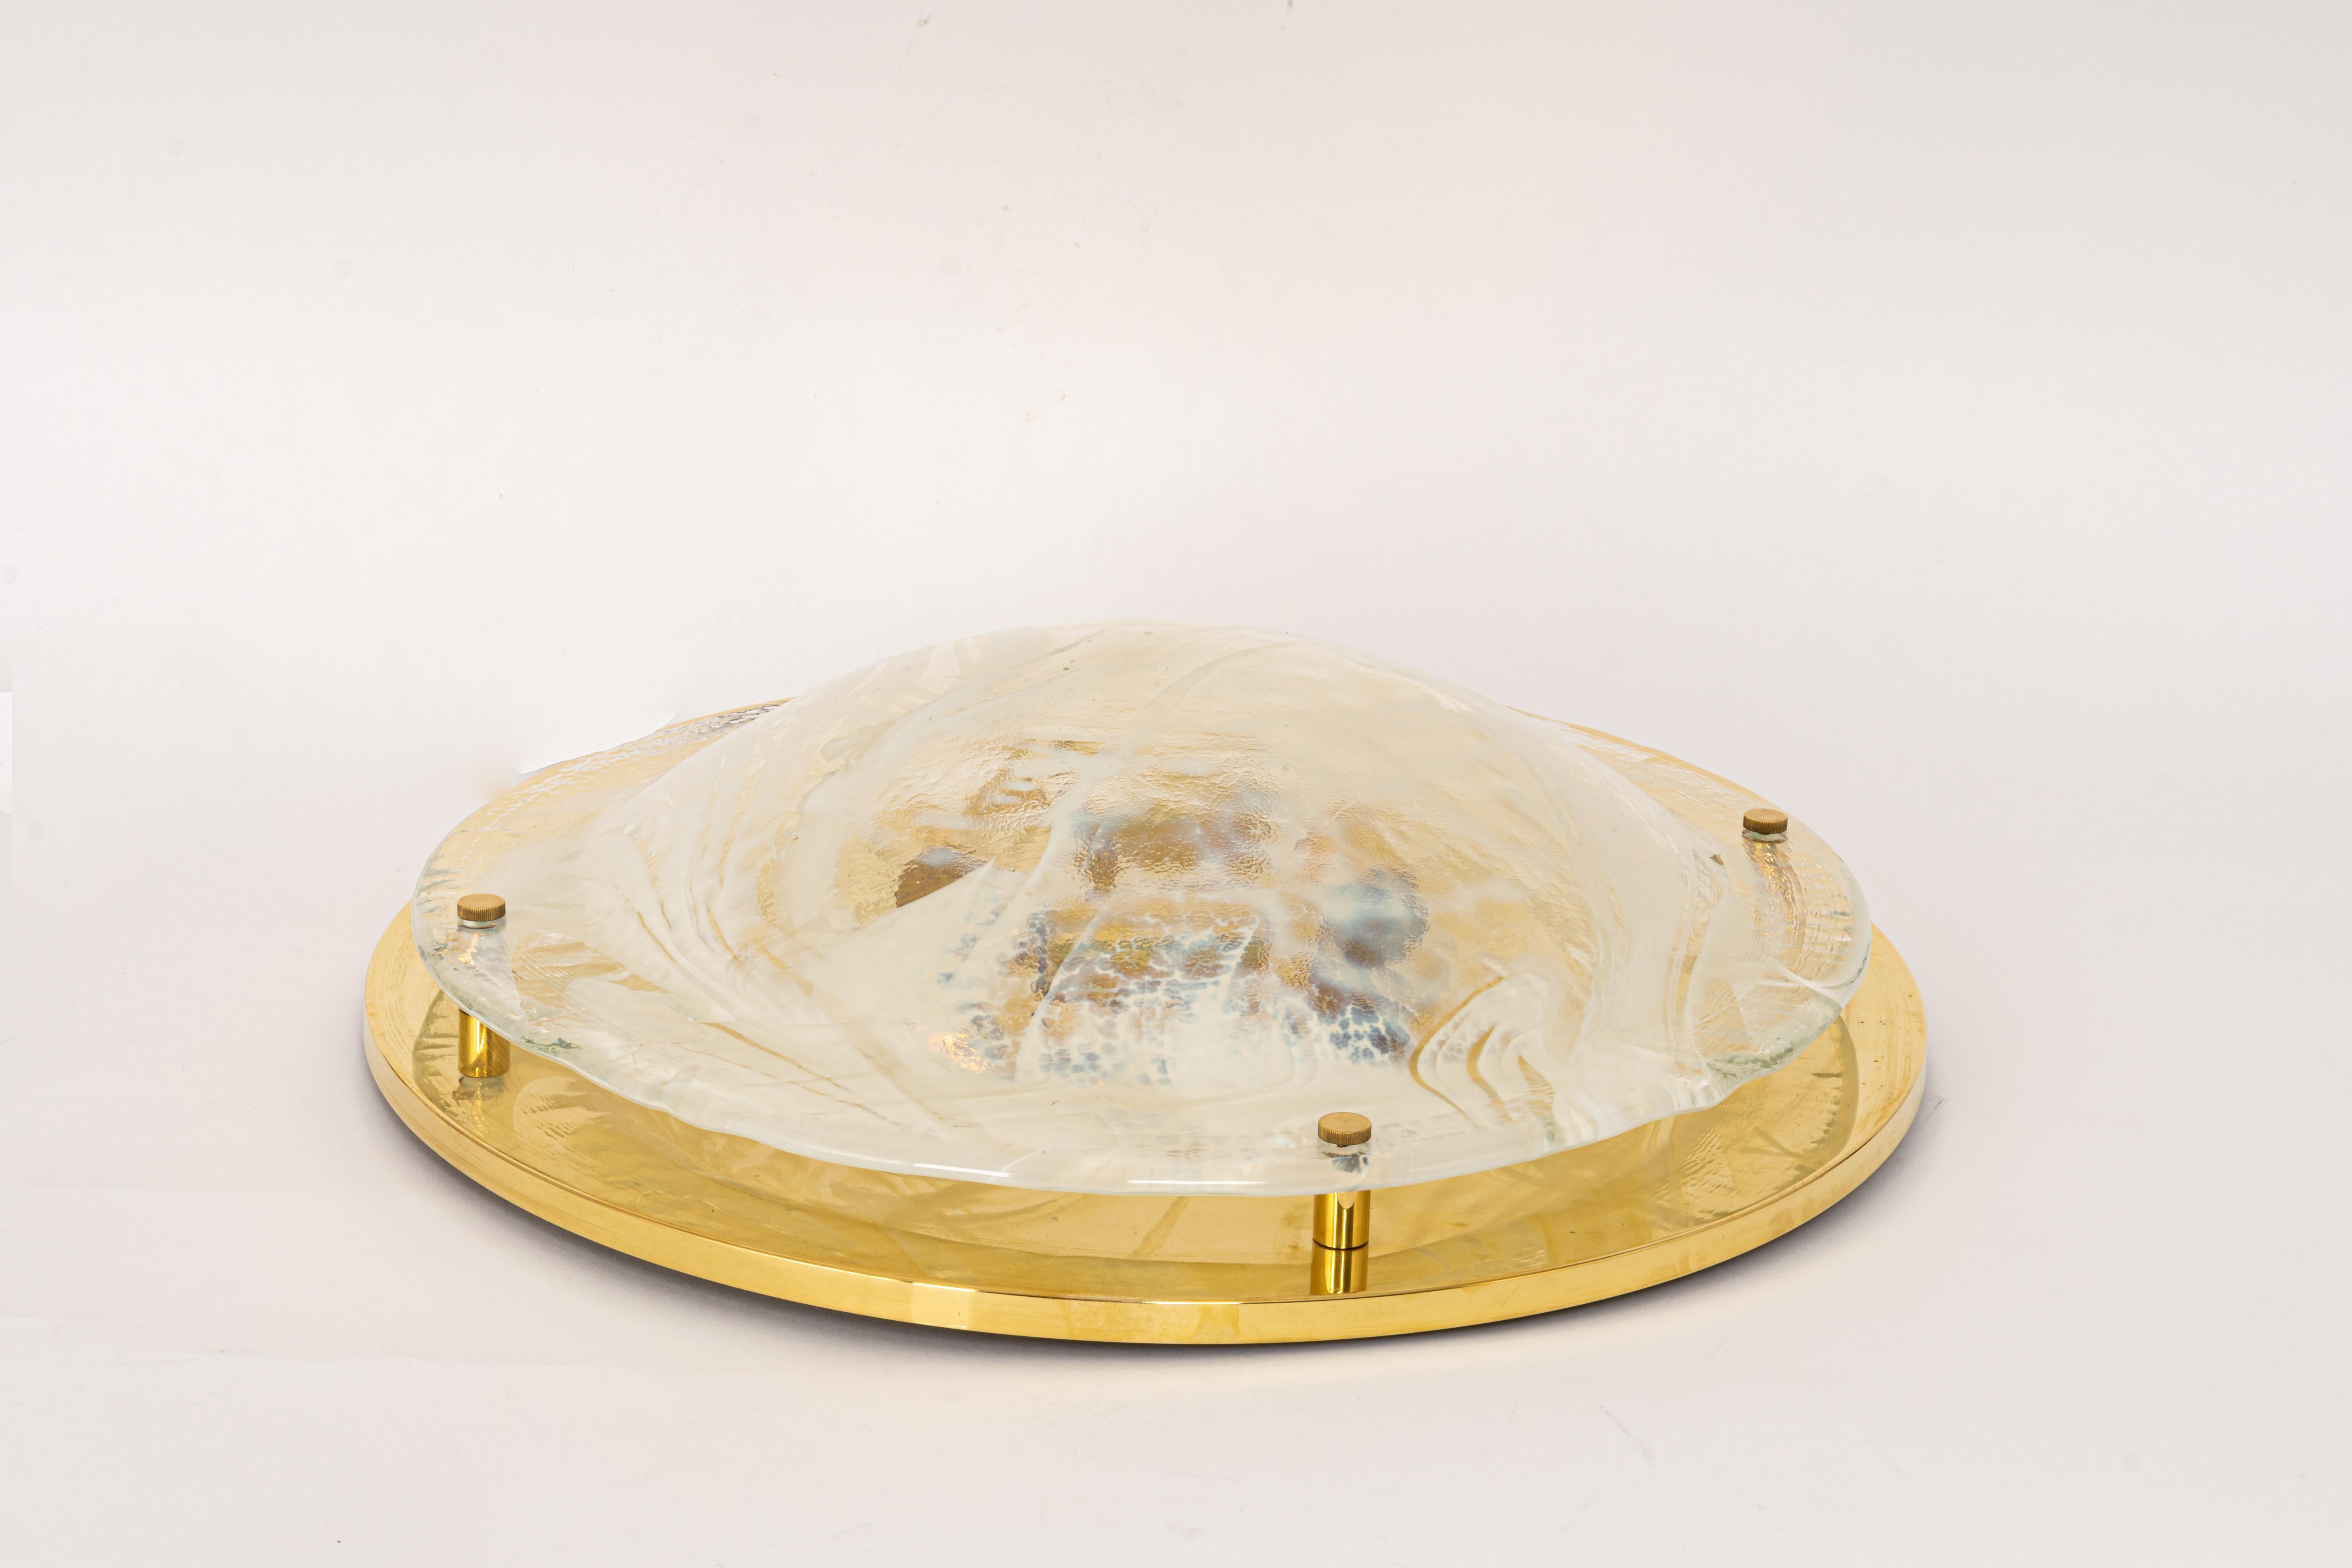 A wonderful round Murano flush mount by Hillebrand Leuchten, Germany, 1970s.
Thick blown glass fixtured on a brass base.

High quality and in very good condition. Cleaned, well-wired and ready to use. 

The fixture requires 4 x E14 Standard